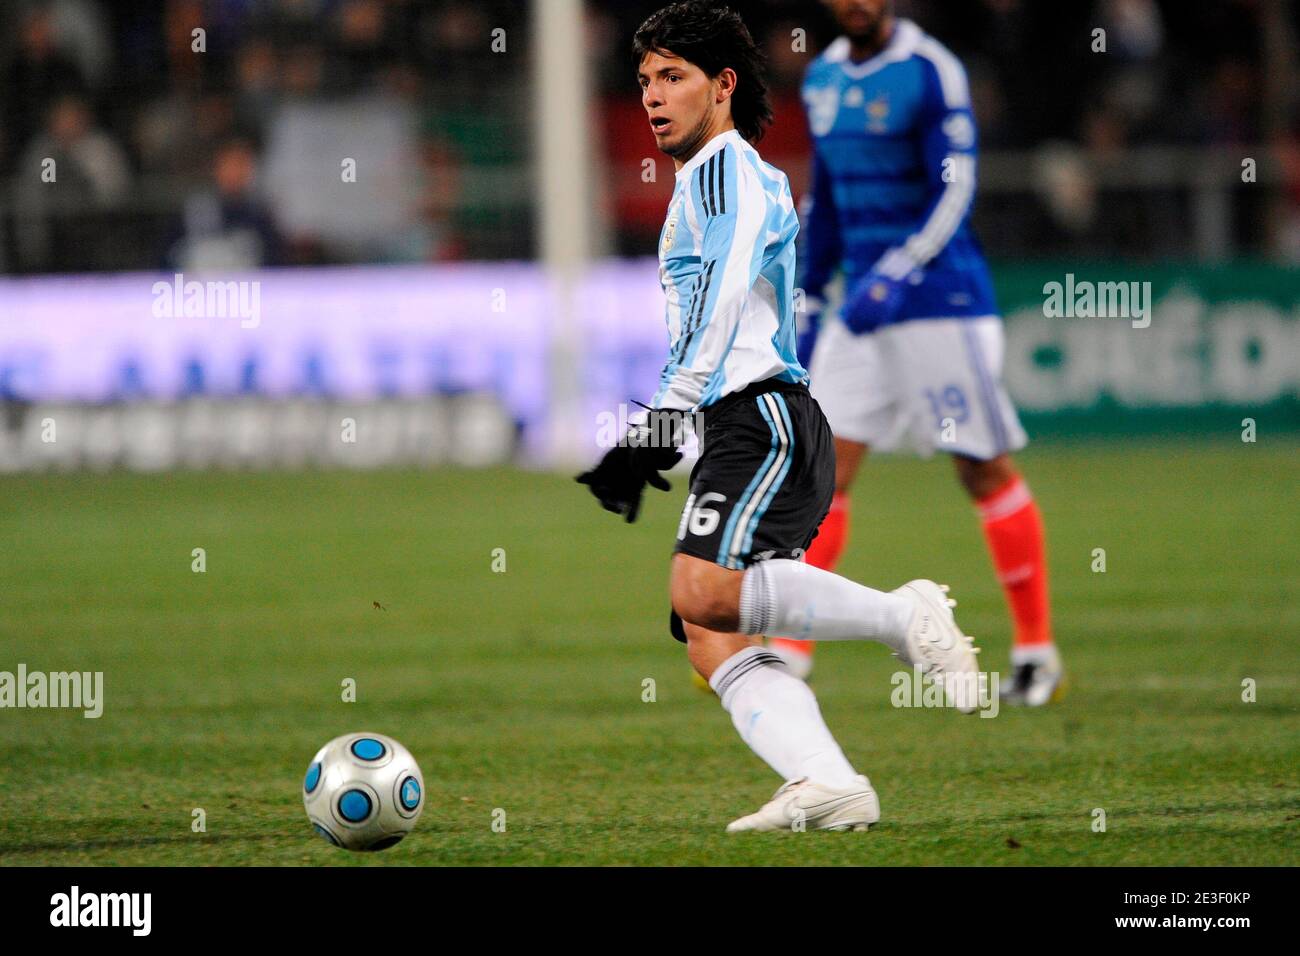 Argentina's Sergio Aguero during the Friendly International Soccer match France vs Argentina in Marseille, France on February 11, 2009. Argentina won 2-0. Photo by Henri Szwarc/ABACAPRESS.COM Stock Photo